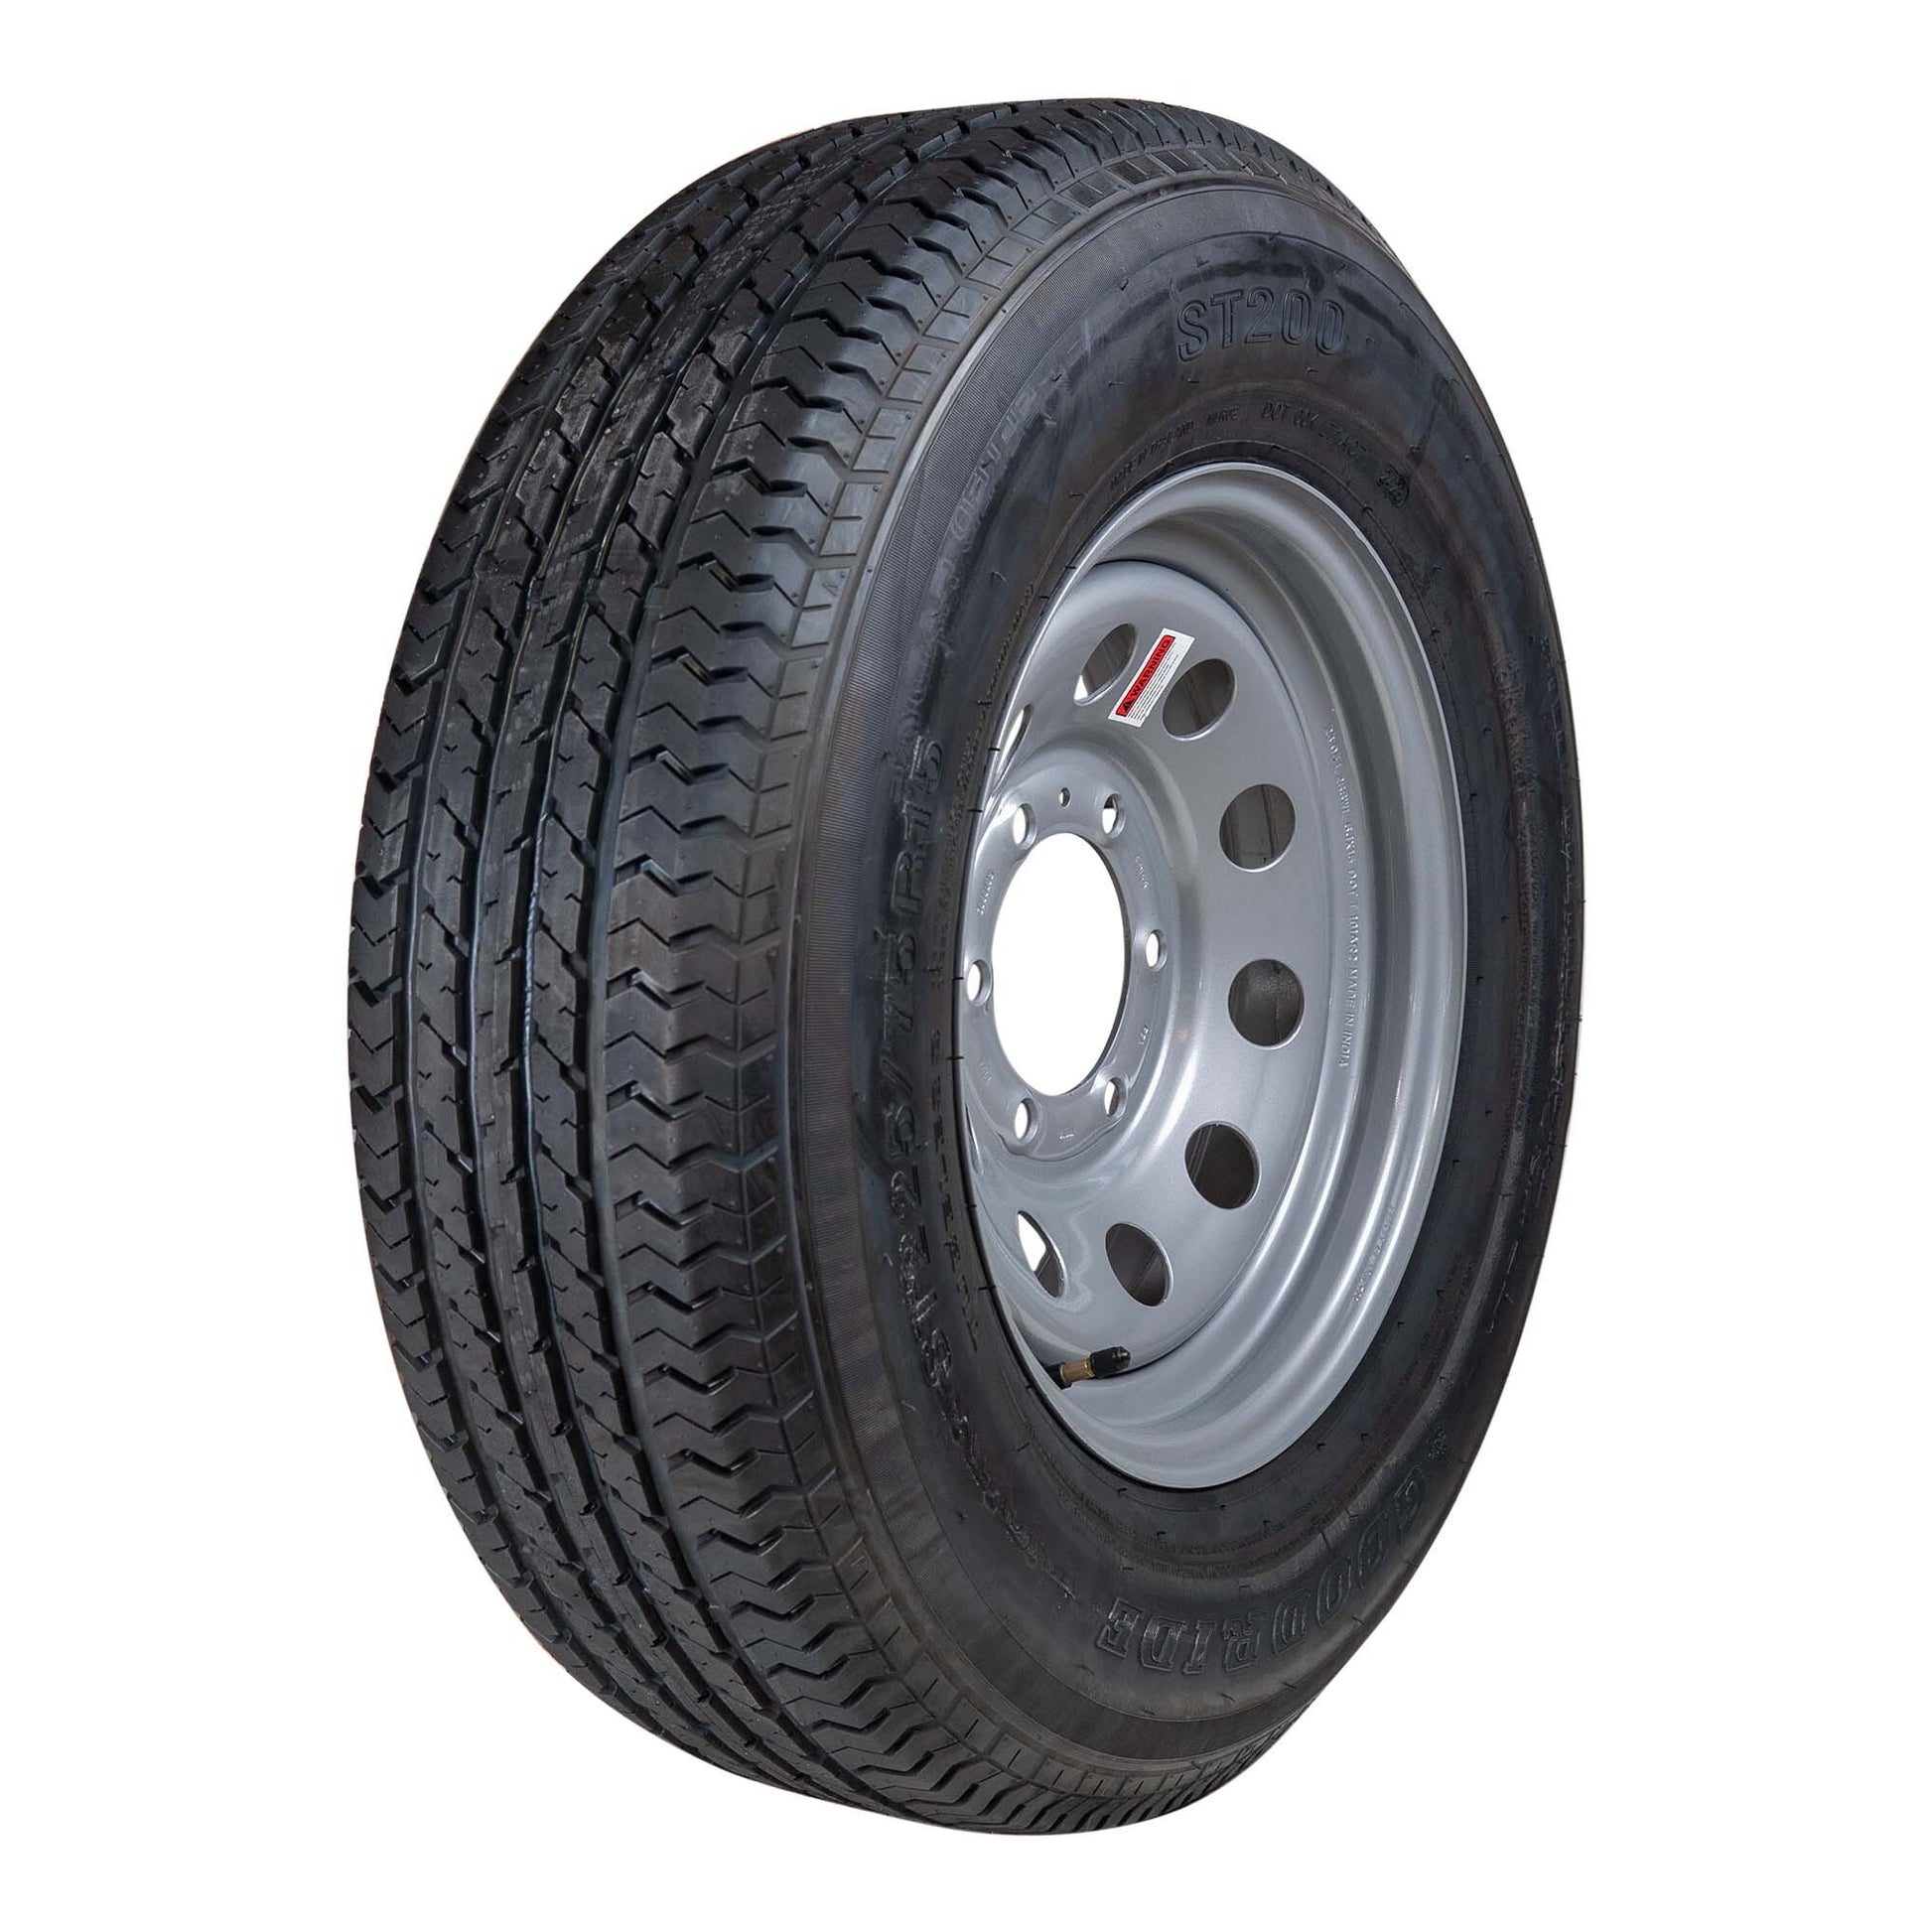 Goodride 15" 10 ply Radial Trailer Tire & Wheel - ST 225/75R15 6 Lug (Silver Mod) - The Trailer Parts Outlet